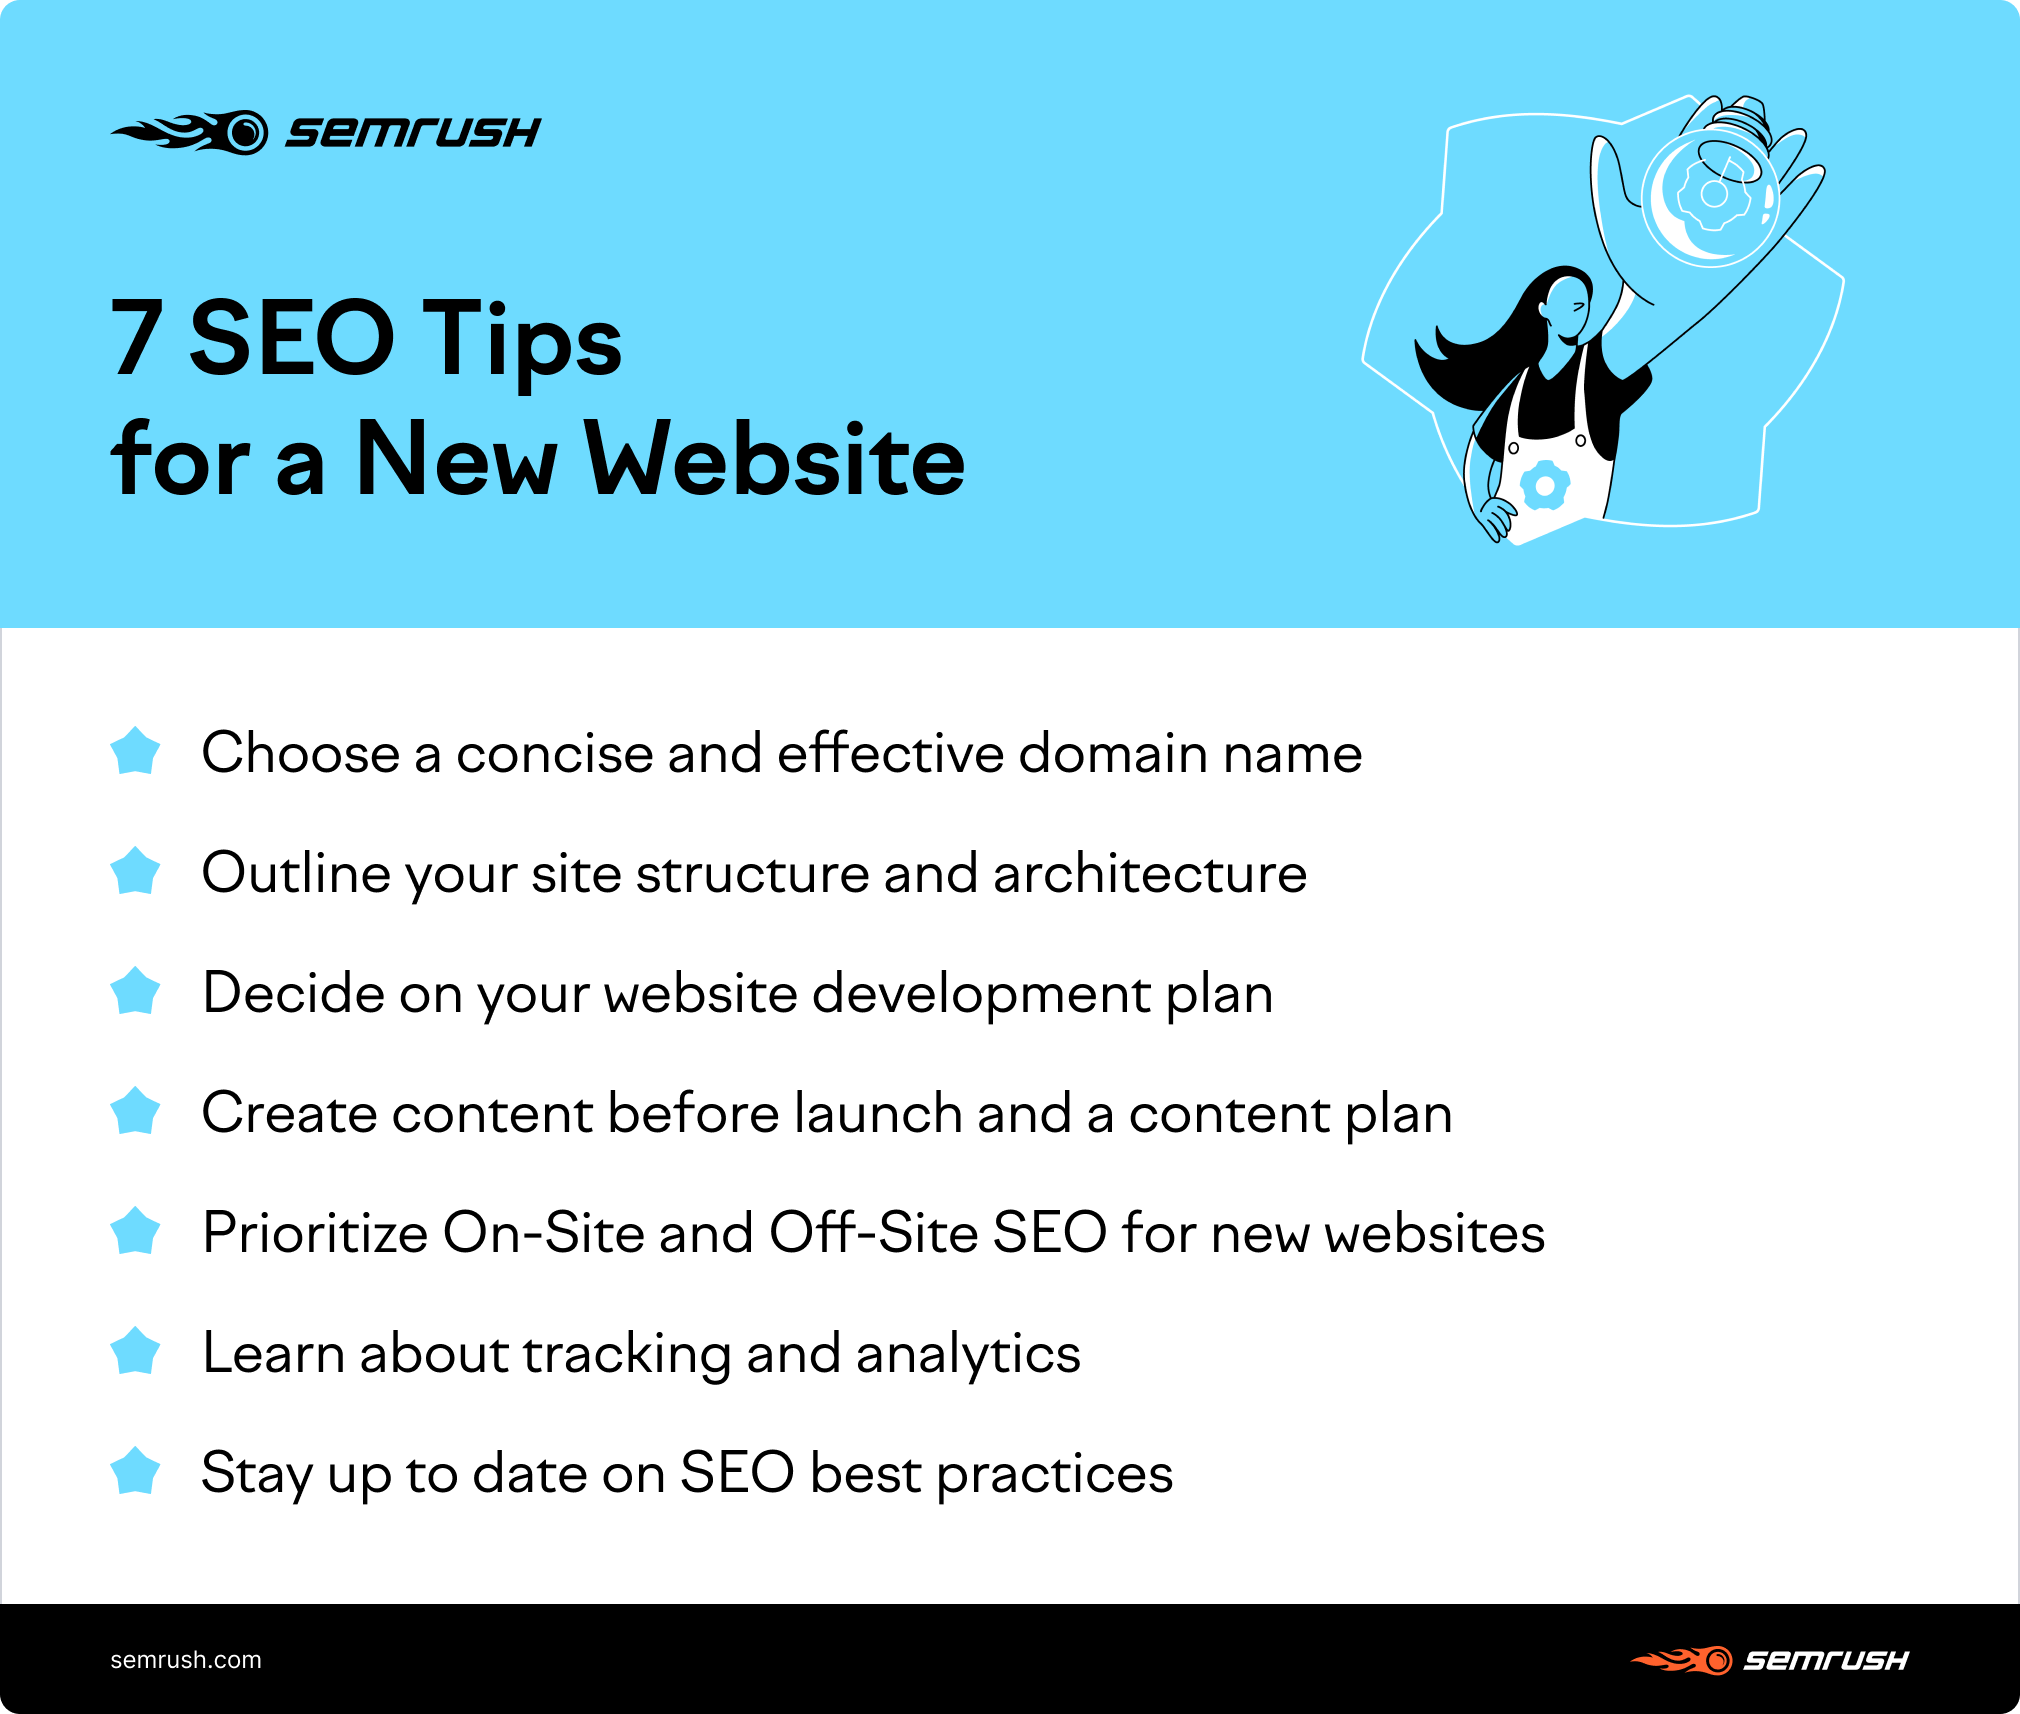 SEO Tips for a New Website infographic